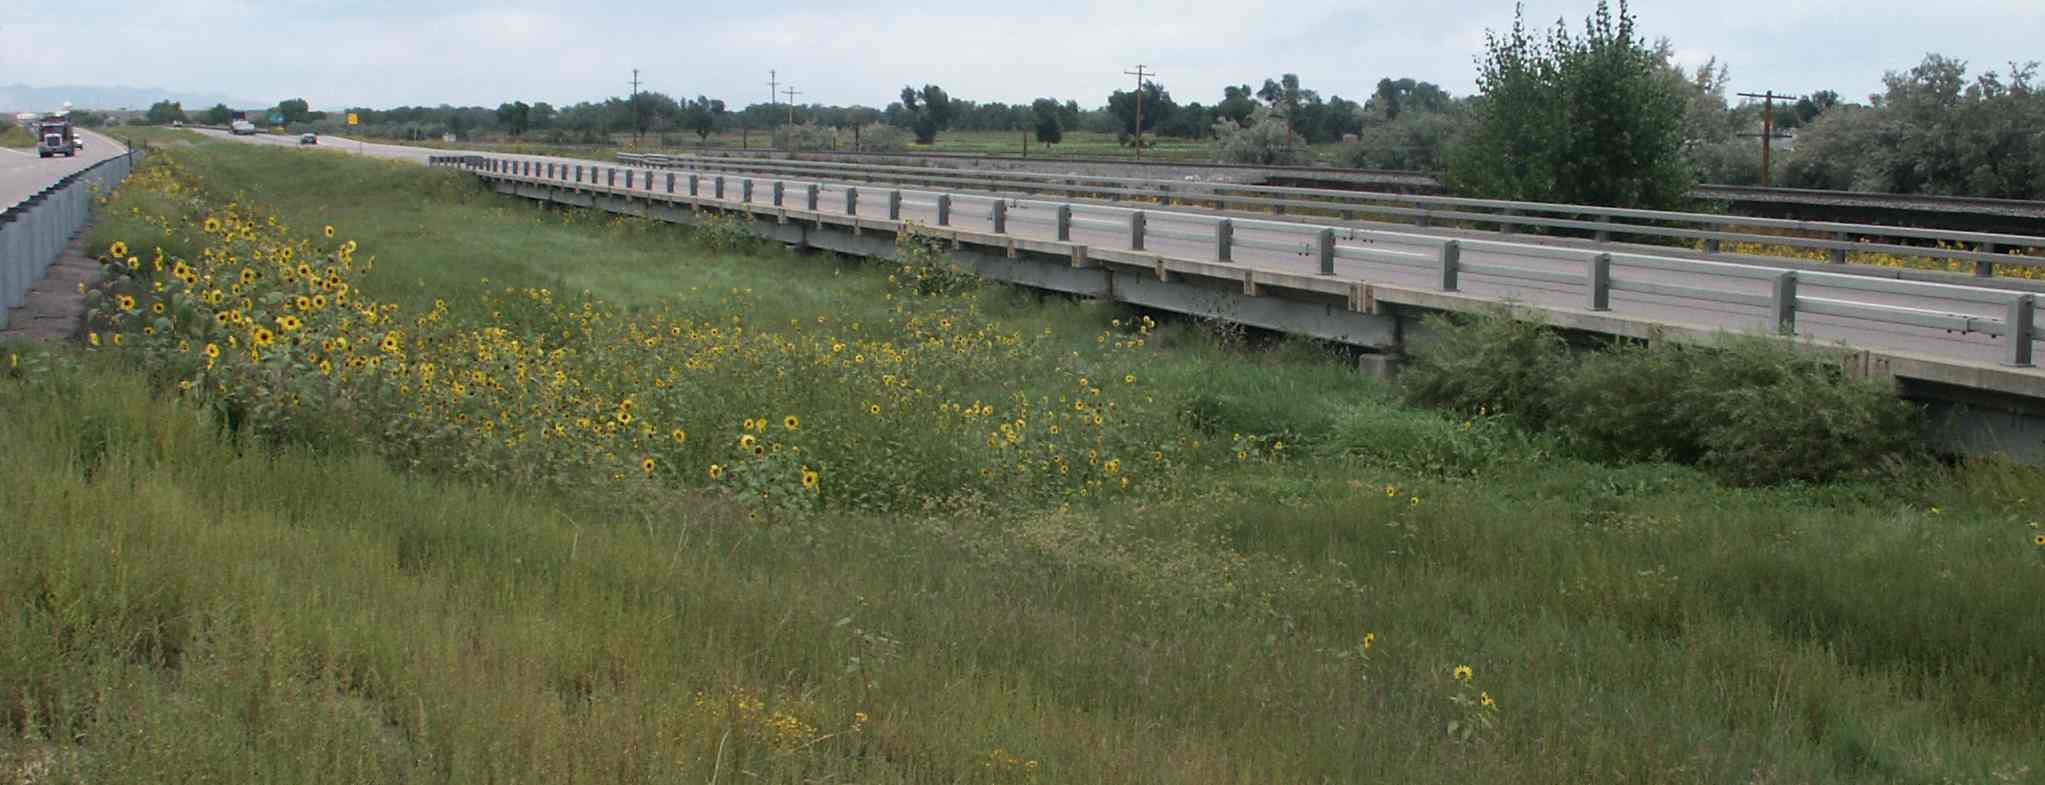 I-25 Northbound over Draw. South of Fountain. detail image